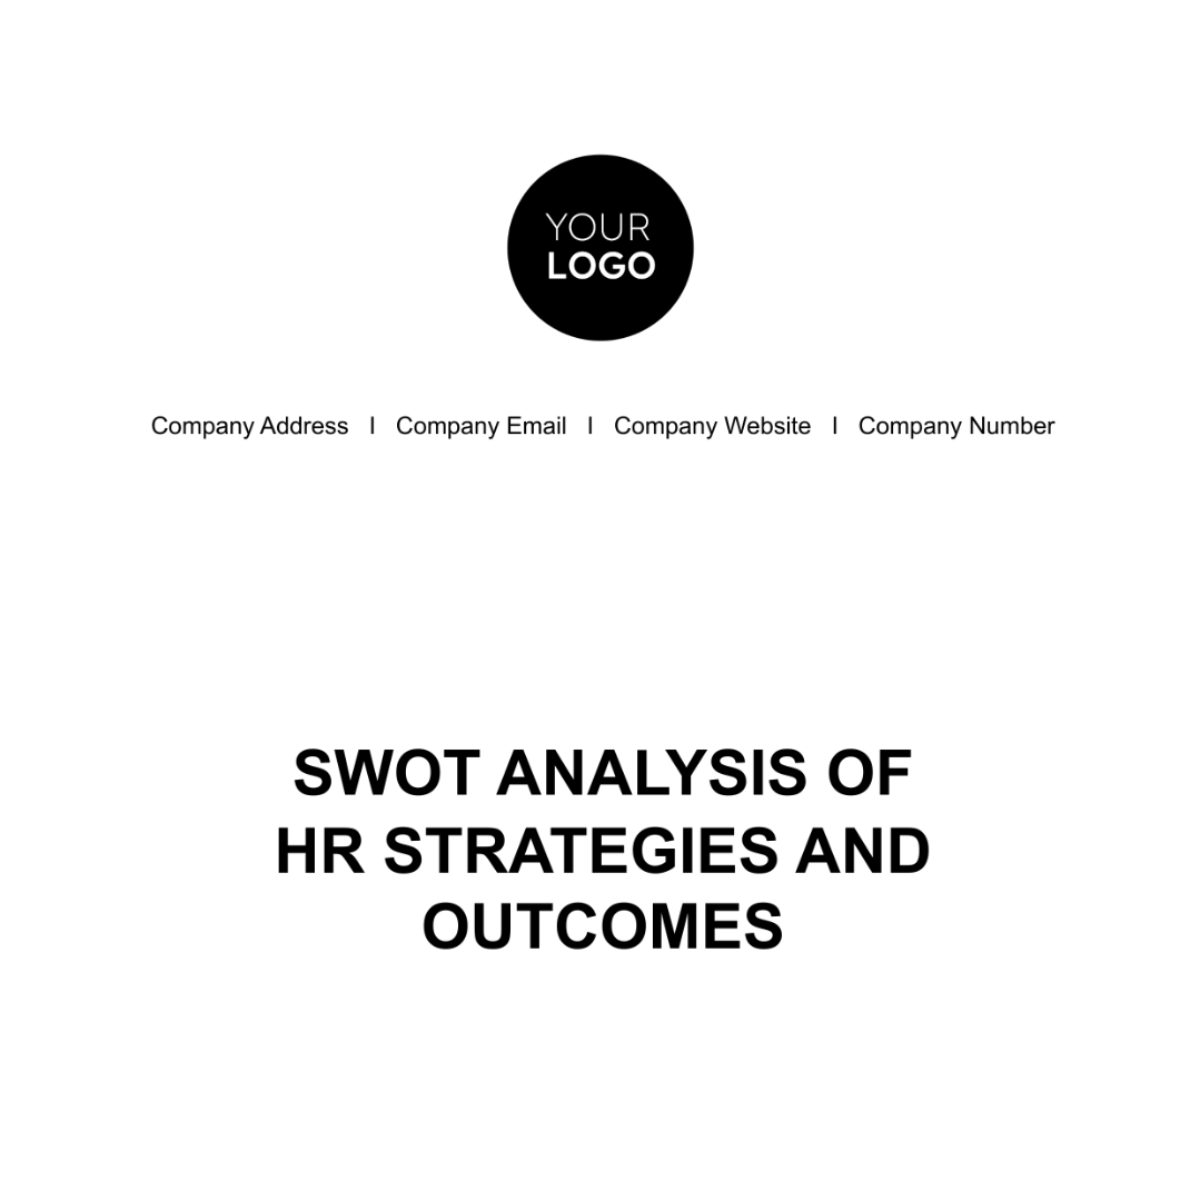 SWOT Analysis of HR Strategies and Outcomes Template